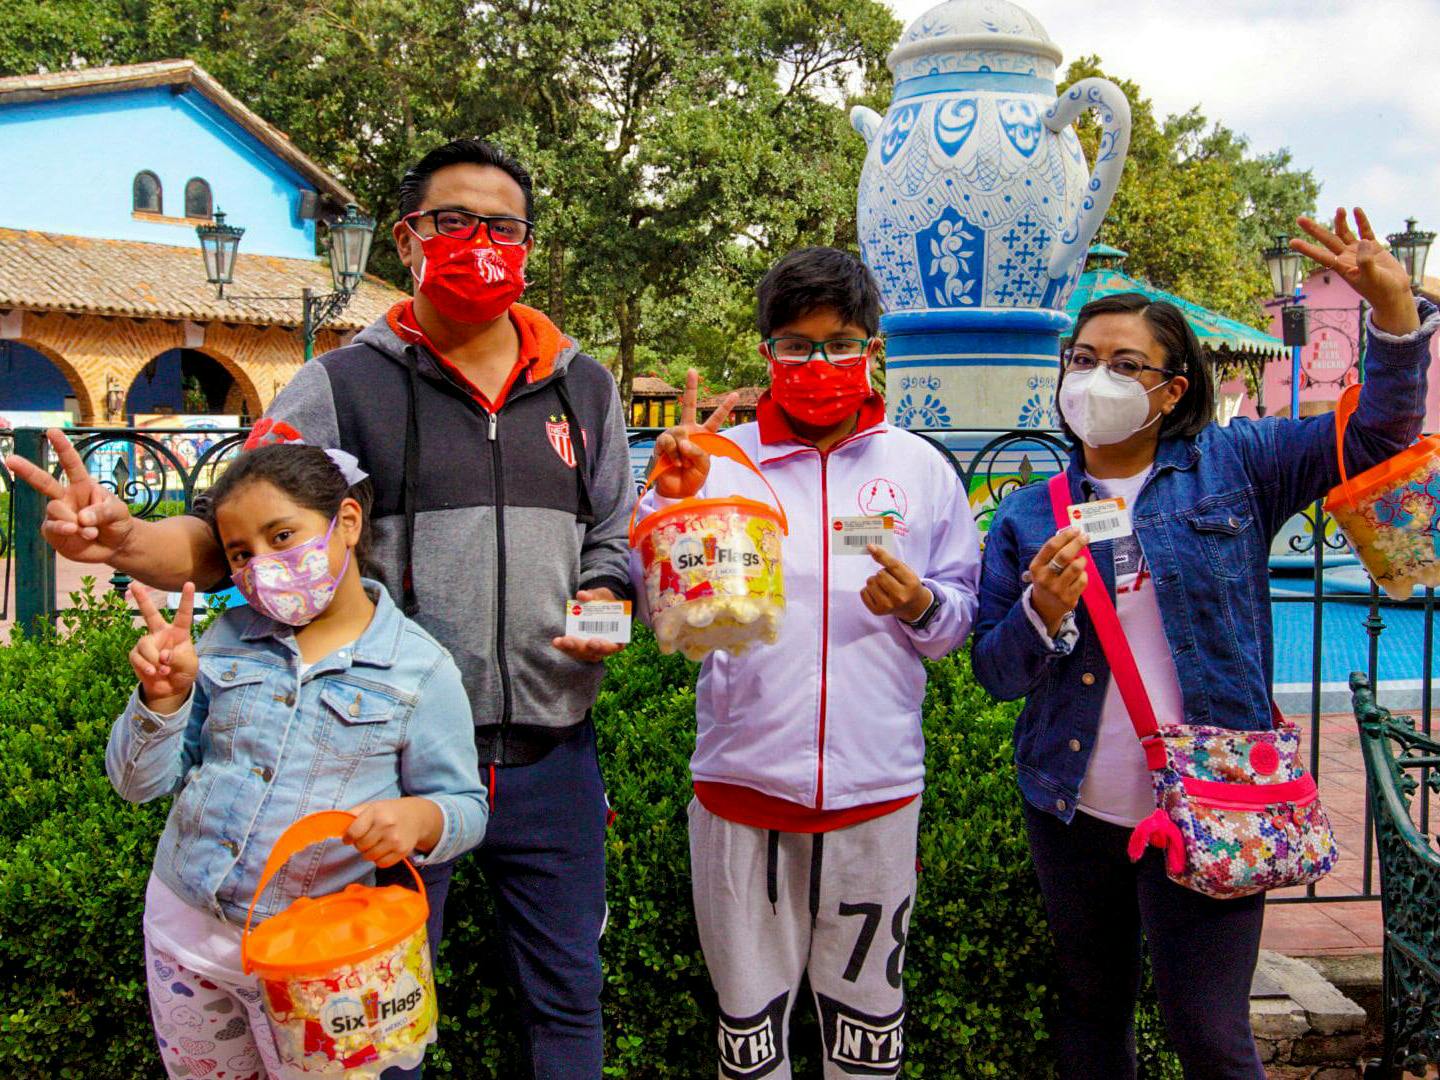 A family of 4 holding up season passes, peace signs, and popcorn, inside a Six Flags amusement park